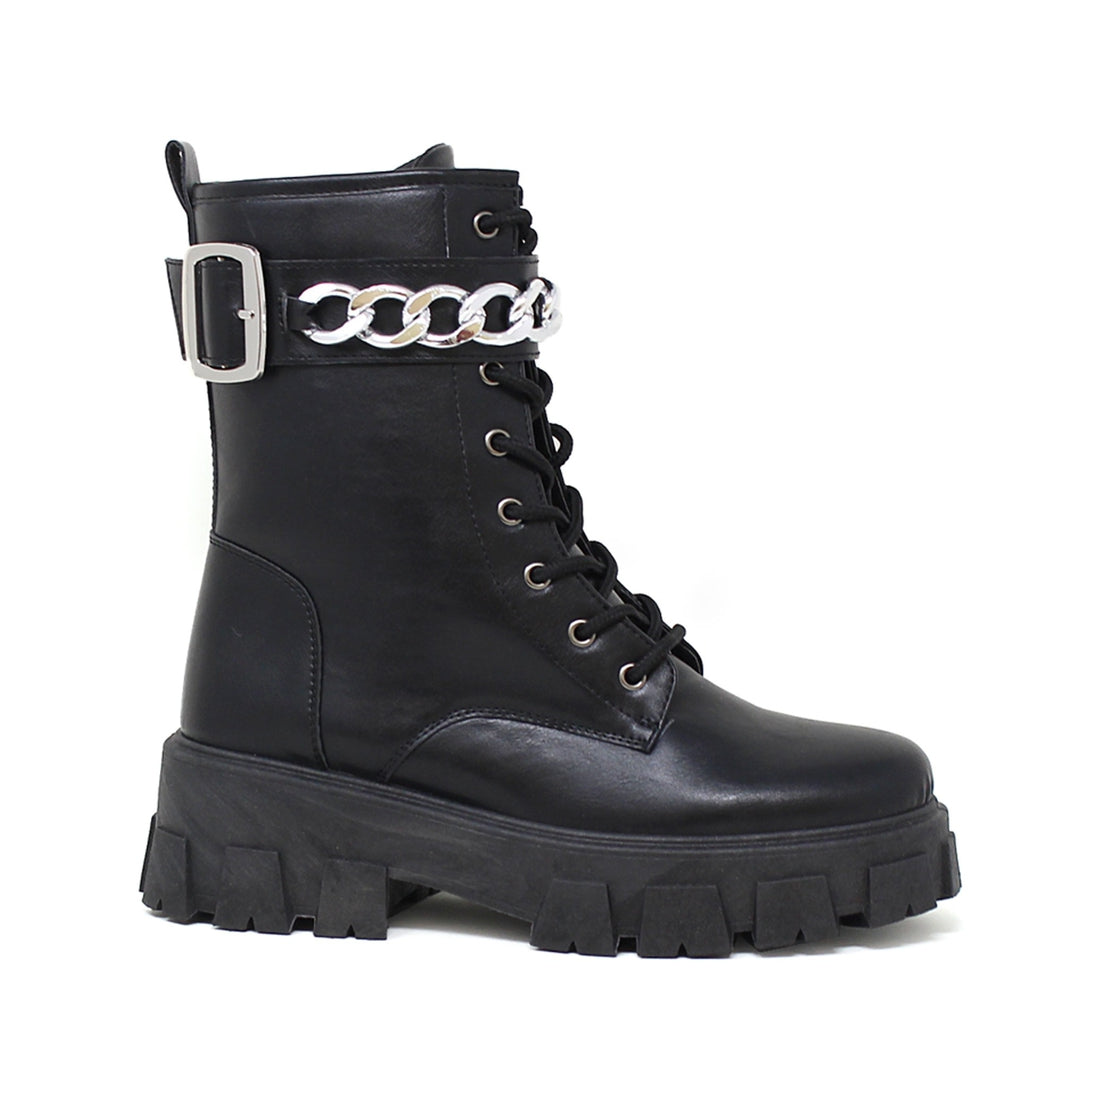 Black Chained Combat Boot